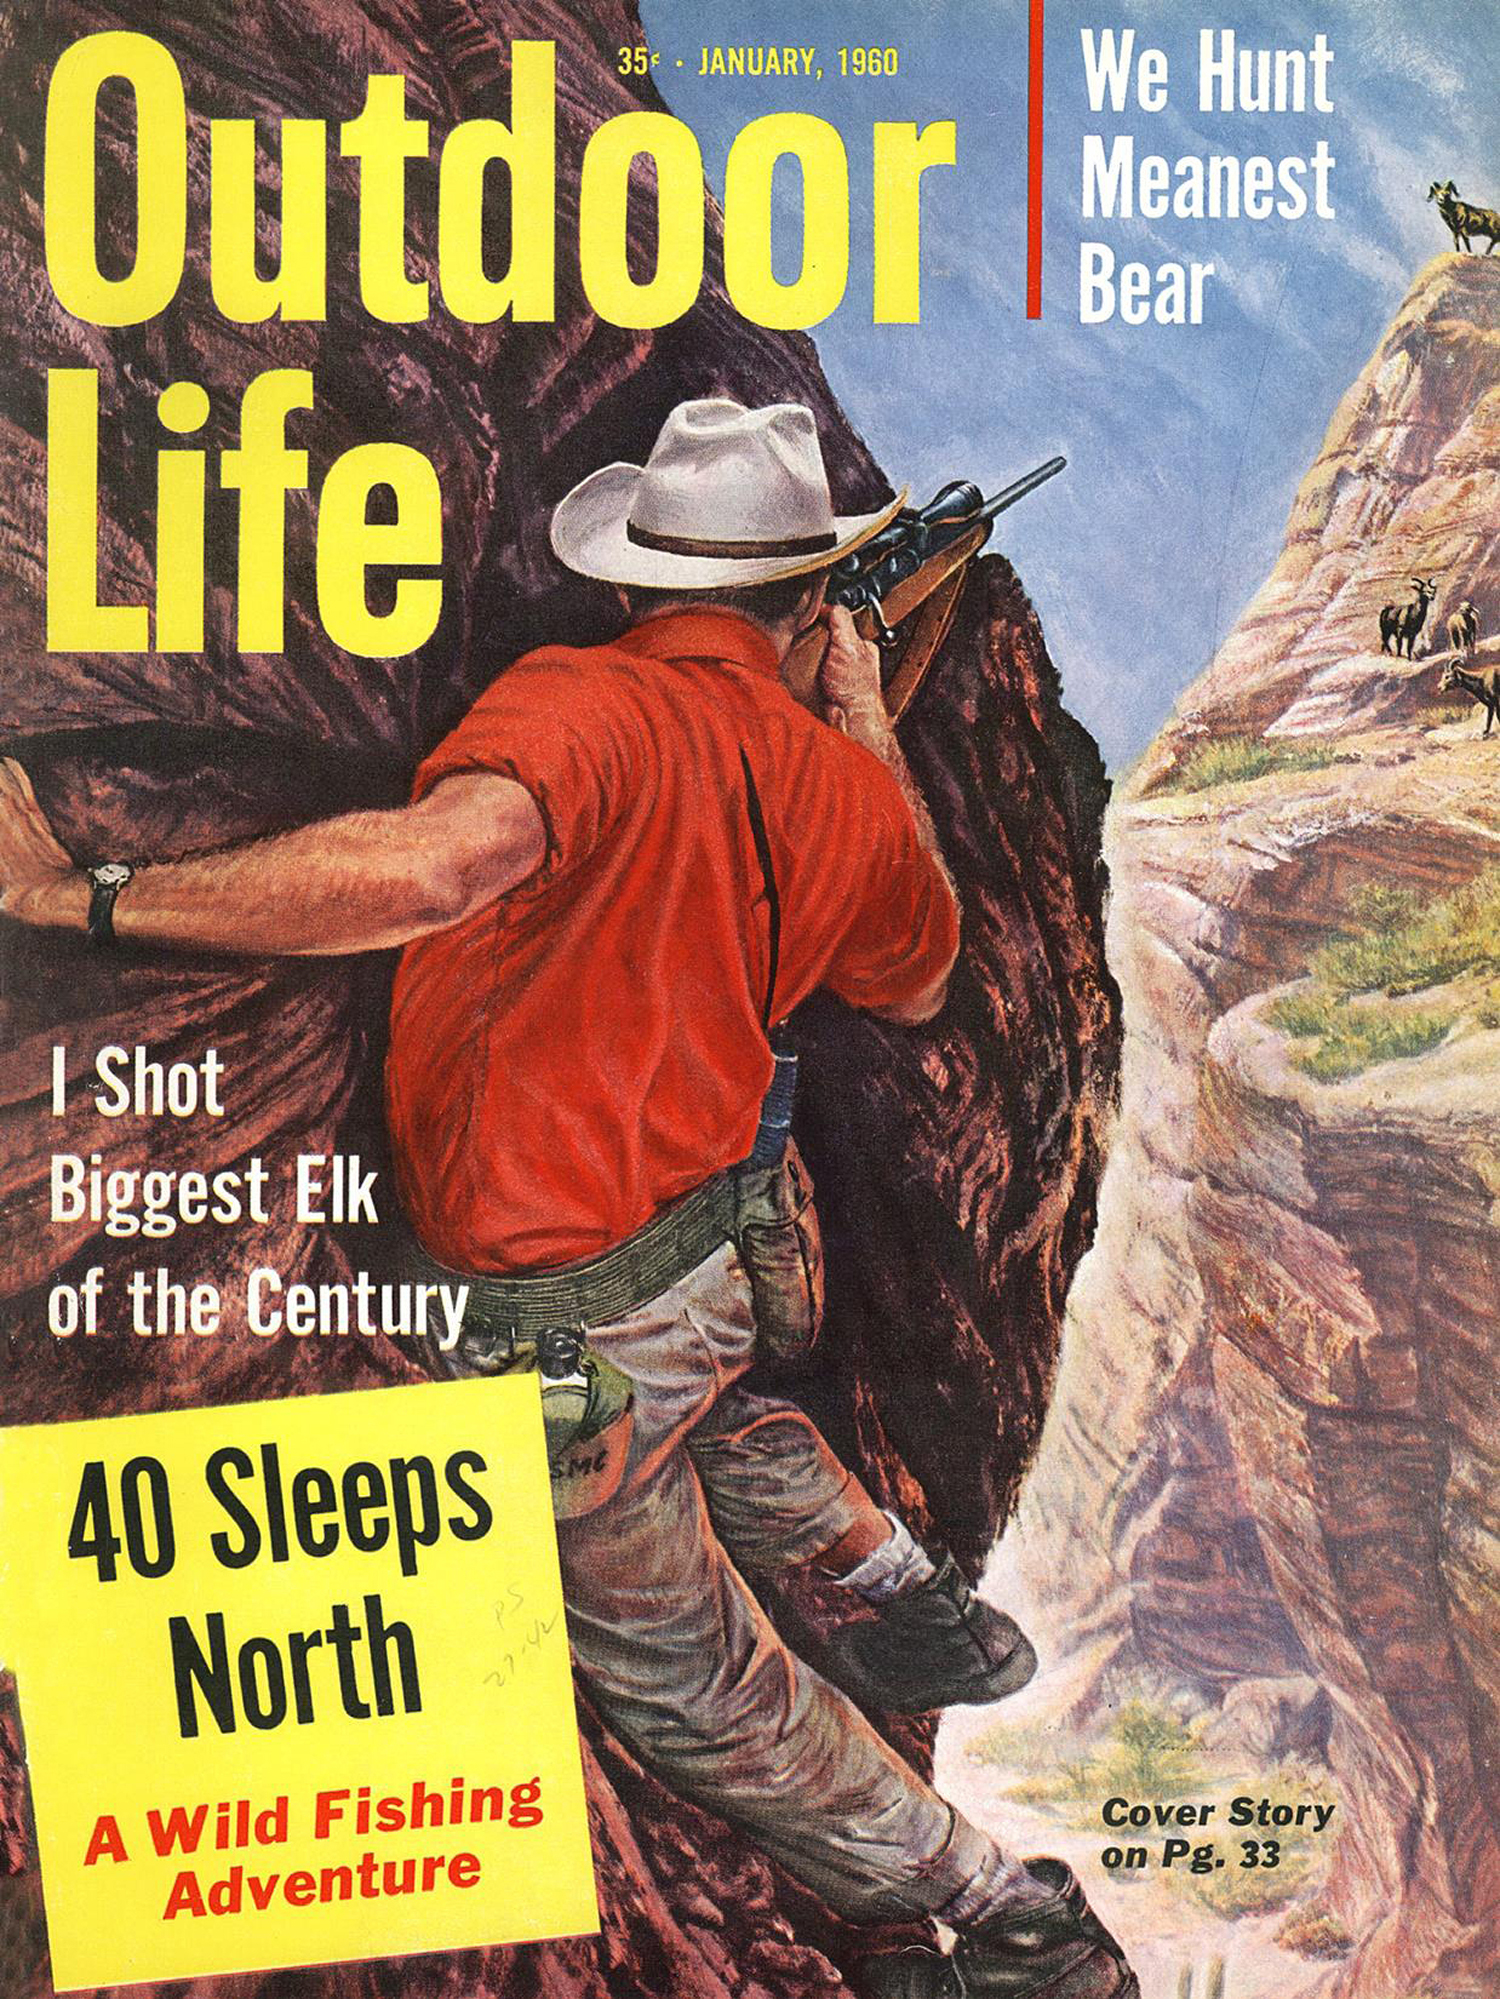 ­January 1960: This era’s covers were full of aspirational Western adventures, like this desert sheep hunt.